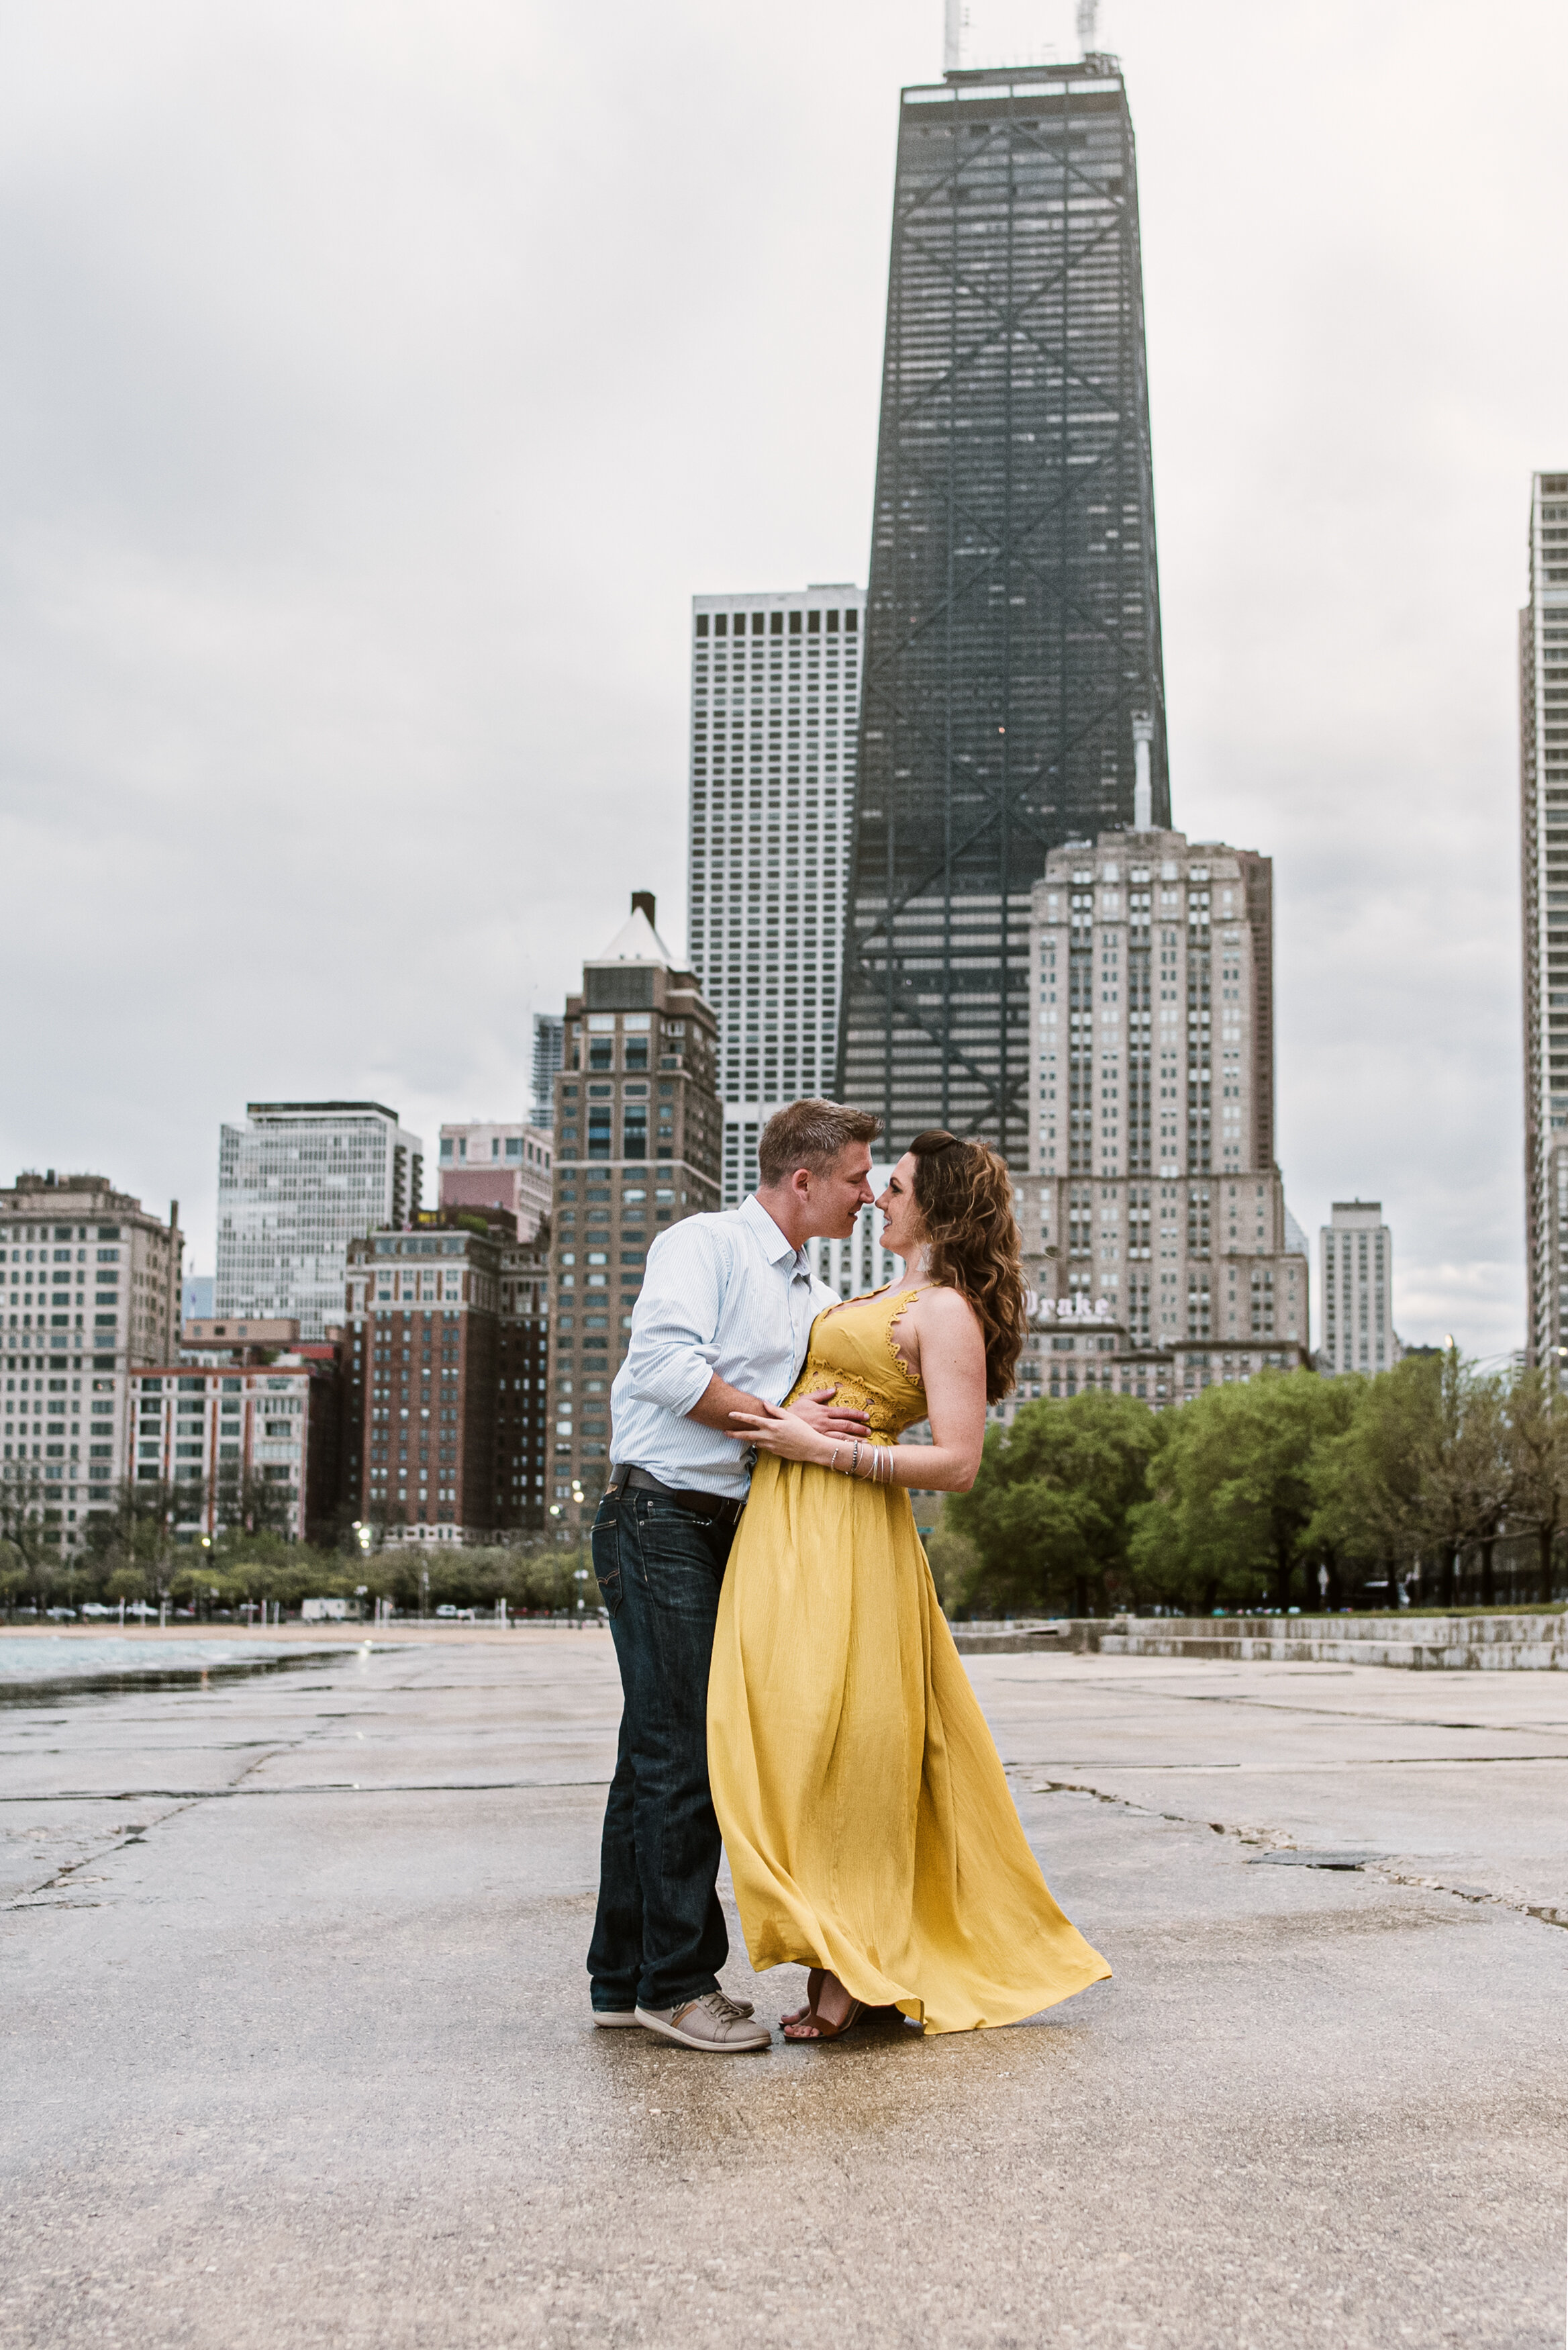 Stunning North Ave Beach Chicago Engagement Session captured by Victoria McDonald Photography. See more engagement photo ideas on CHItheeWED.com!